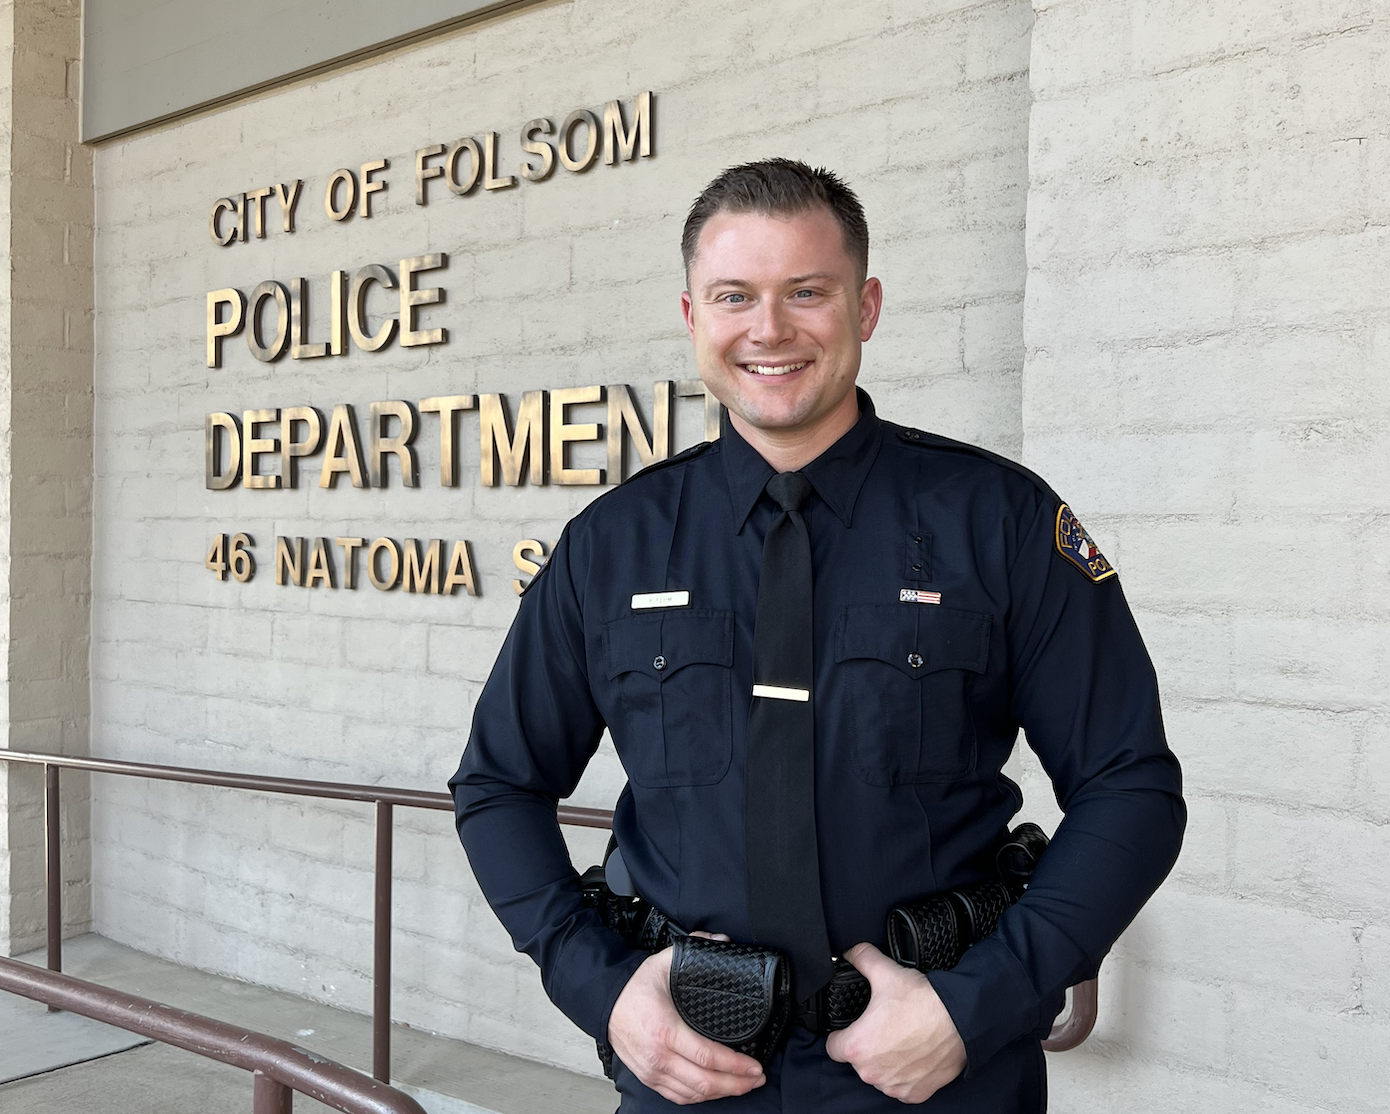 Folsom native is city’s newest Police Officer